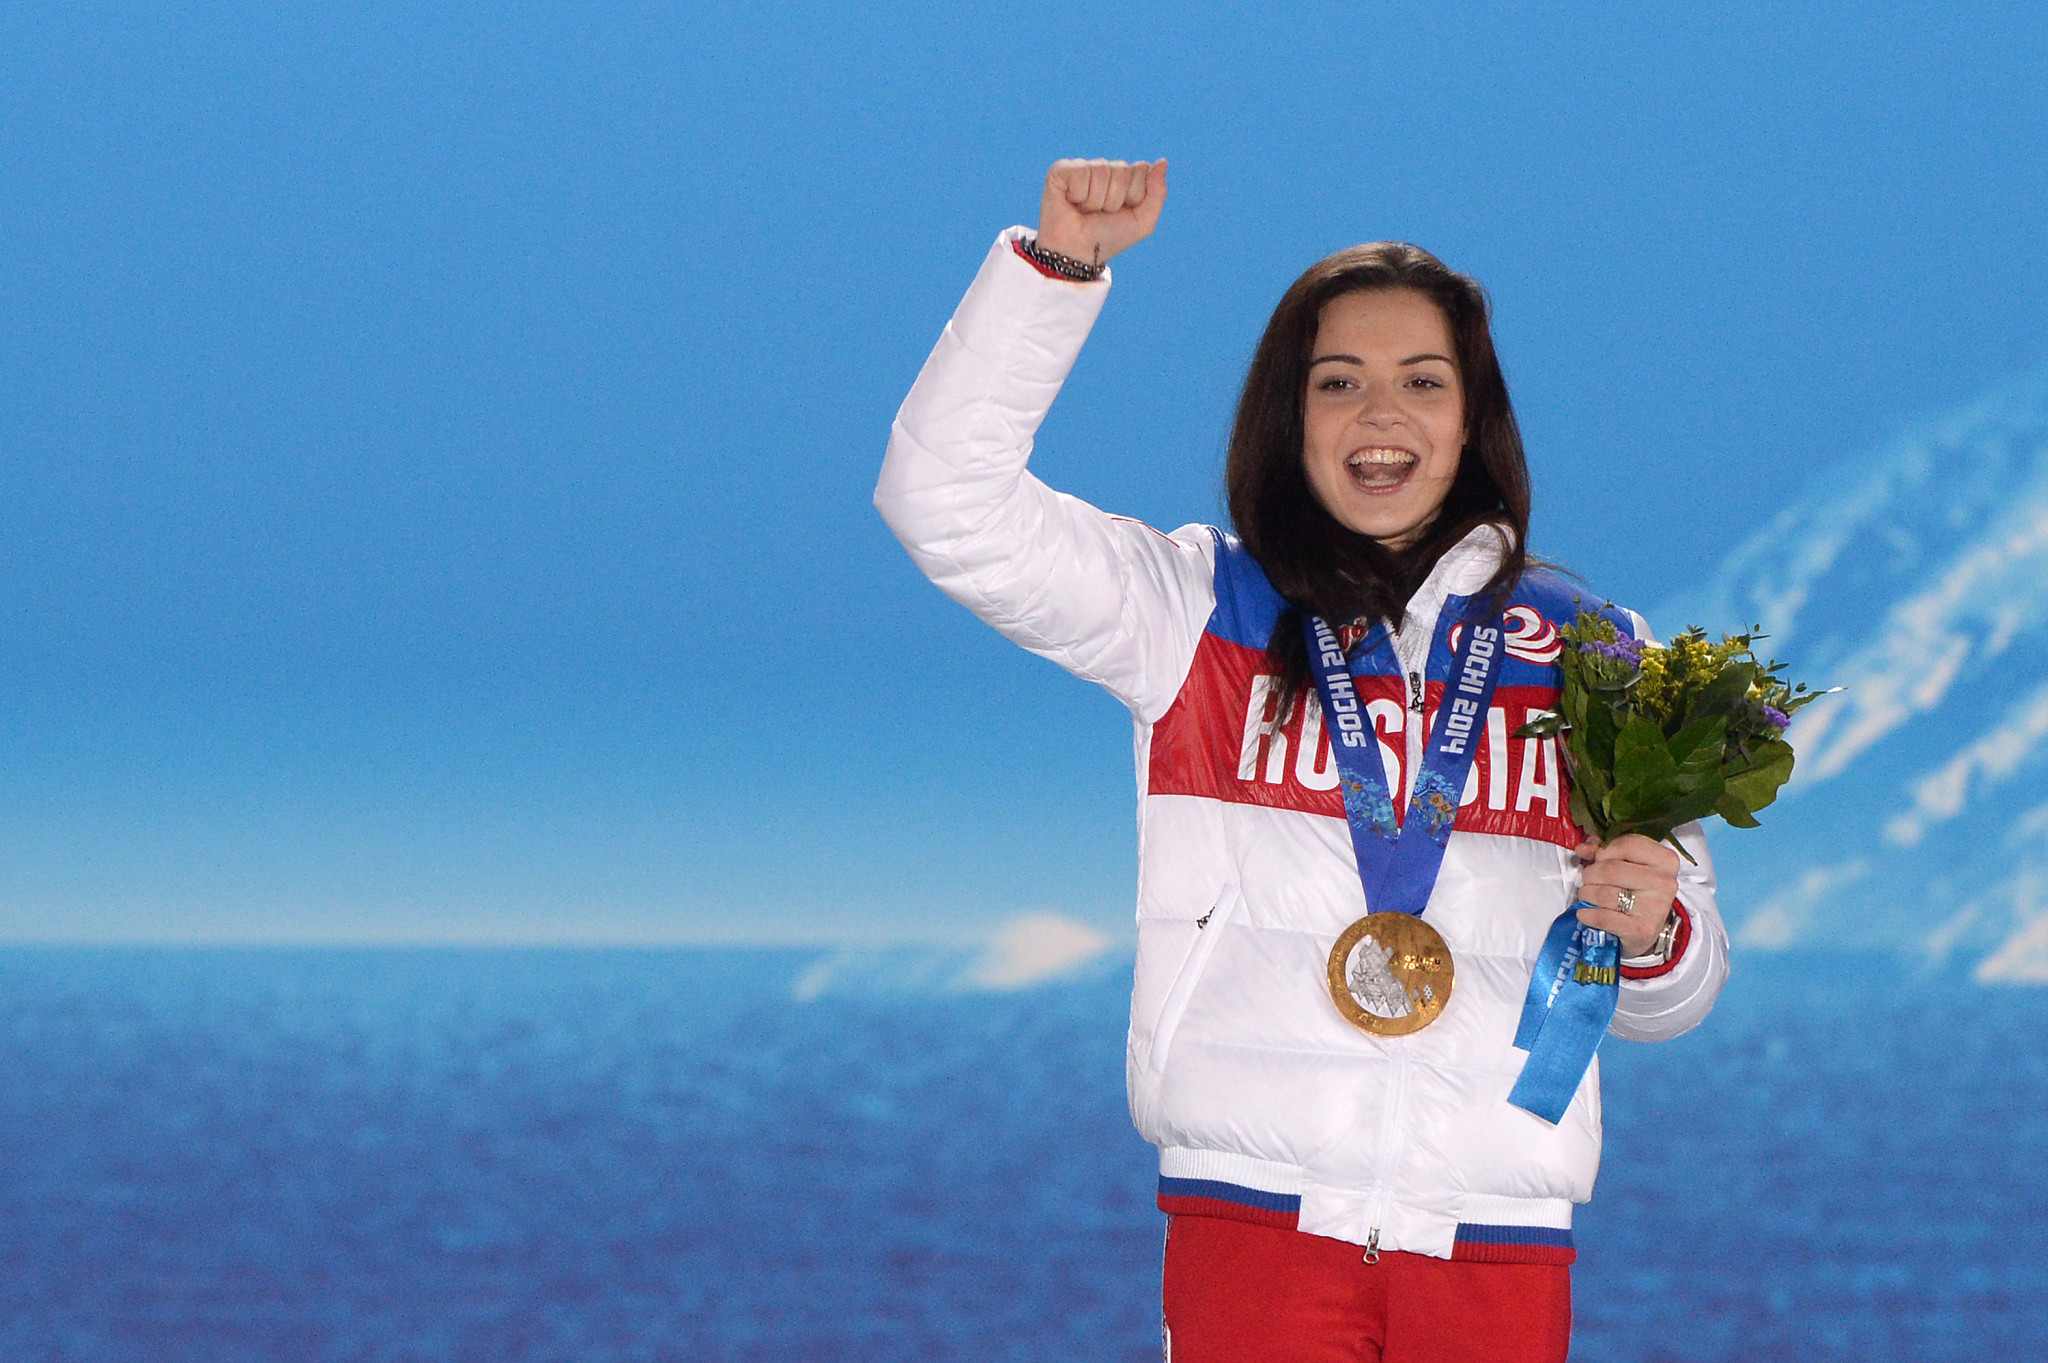 Sochi 2014 figure skating champion Sotnikova claims she had doping positive cleared by B-sample